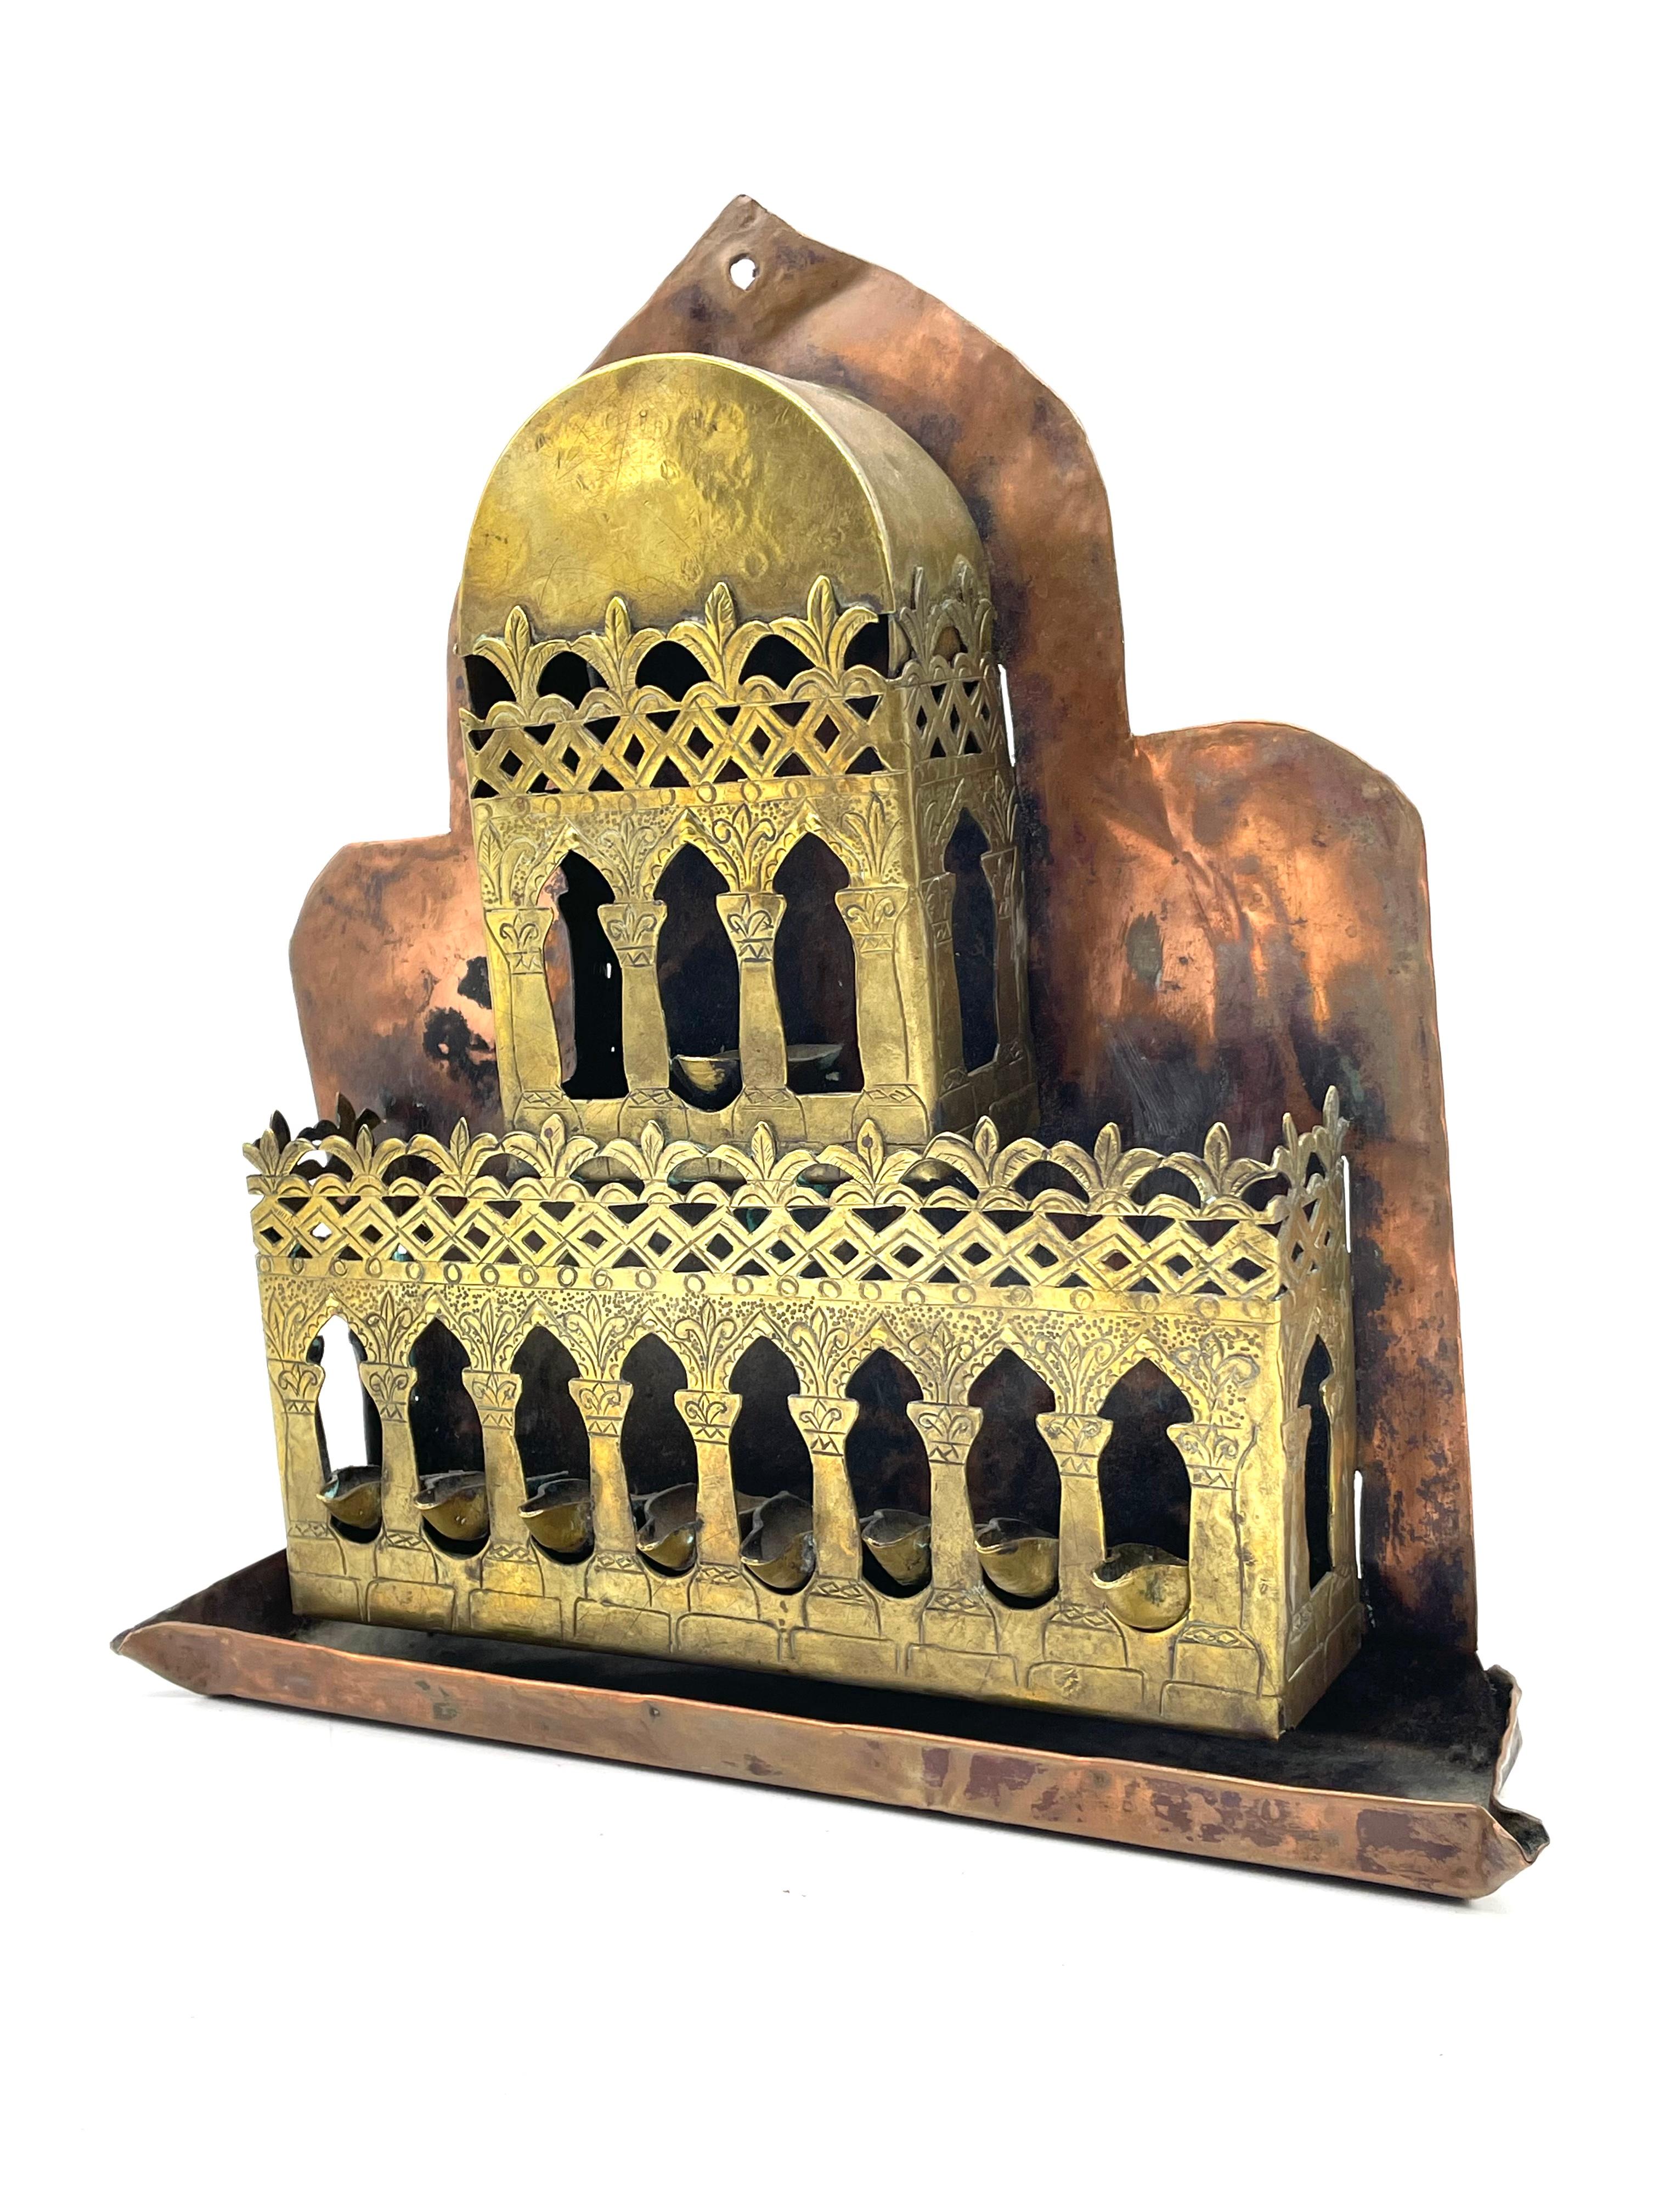 Hanukkah lamp shaped like a palace, surmounted by Islamic crescent. Made in Laghouat, Algeria. 
The Hanukkah lamp is made of two parts: a pierced and engraved brass in the shape of a palace, and a cooper sheet replicating the outlines of the